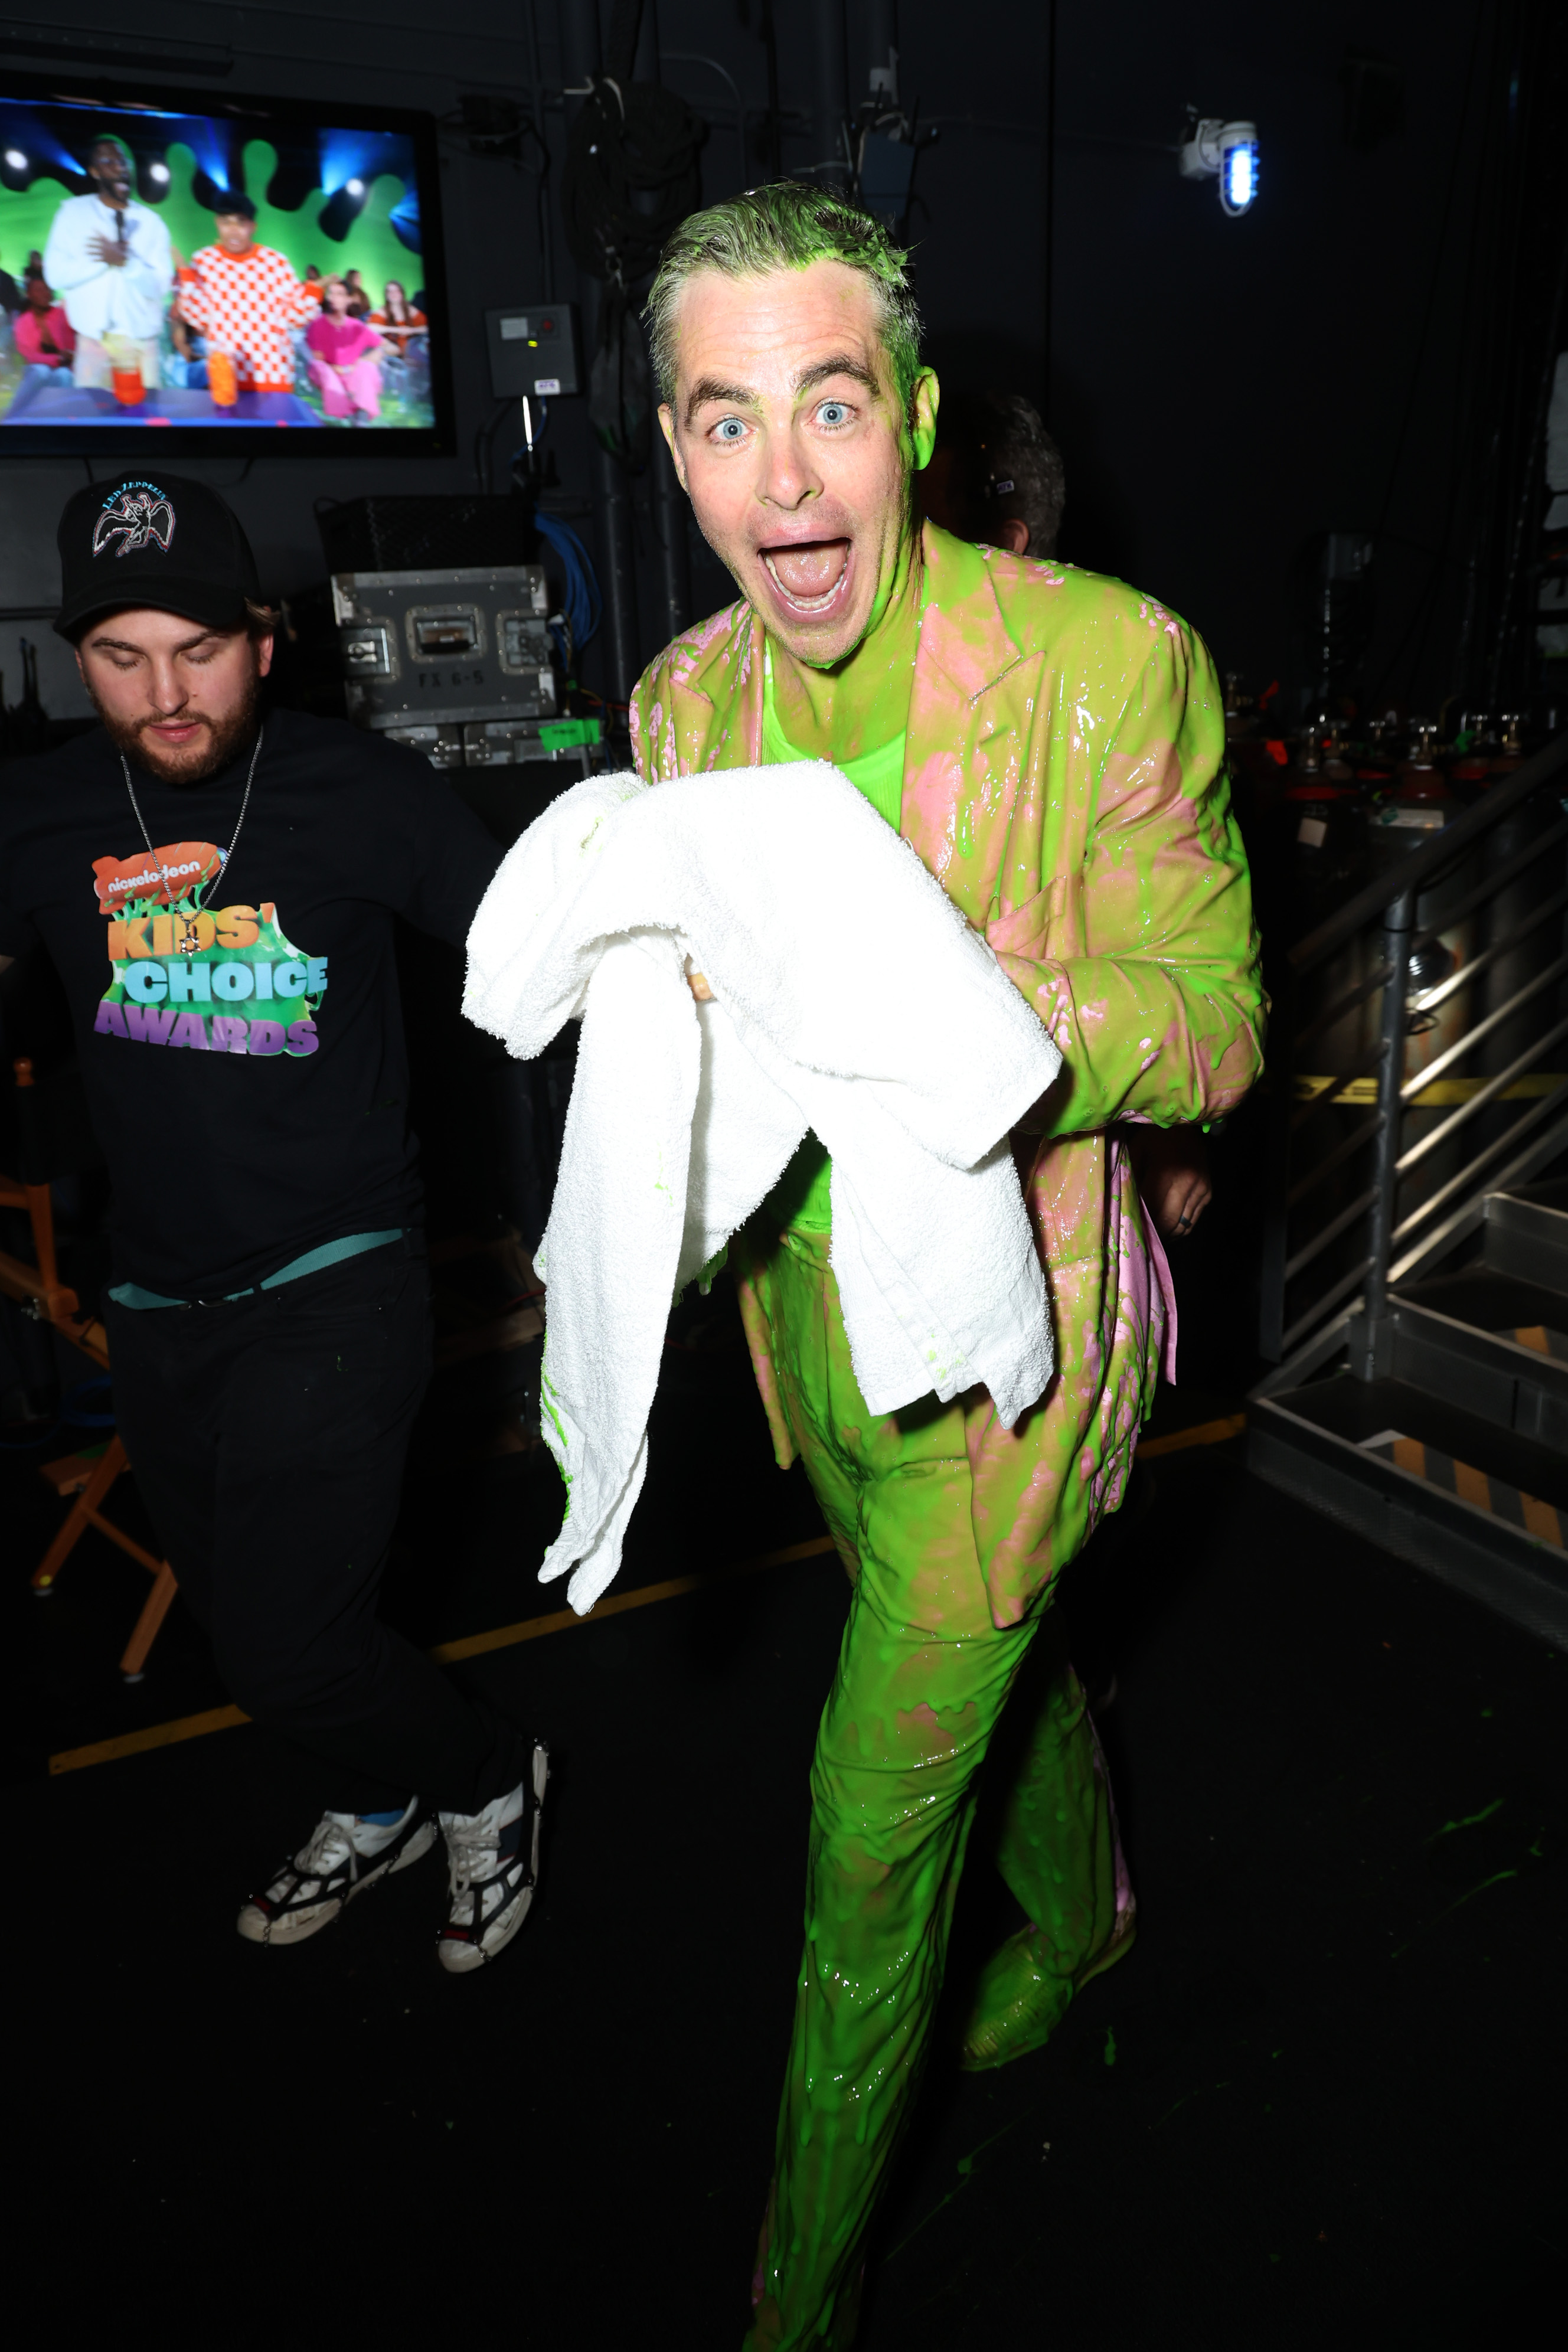 Chris Pine attends the 2023 Nickelodeon Kids' Choice Awards at Microsoft Theater on March 04, 2023 in Los Angeles, California. (Photo by Phillip Faraone/Getty Images for Nickelodeon)